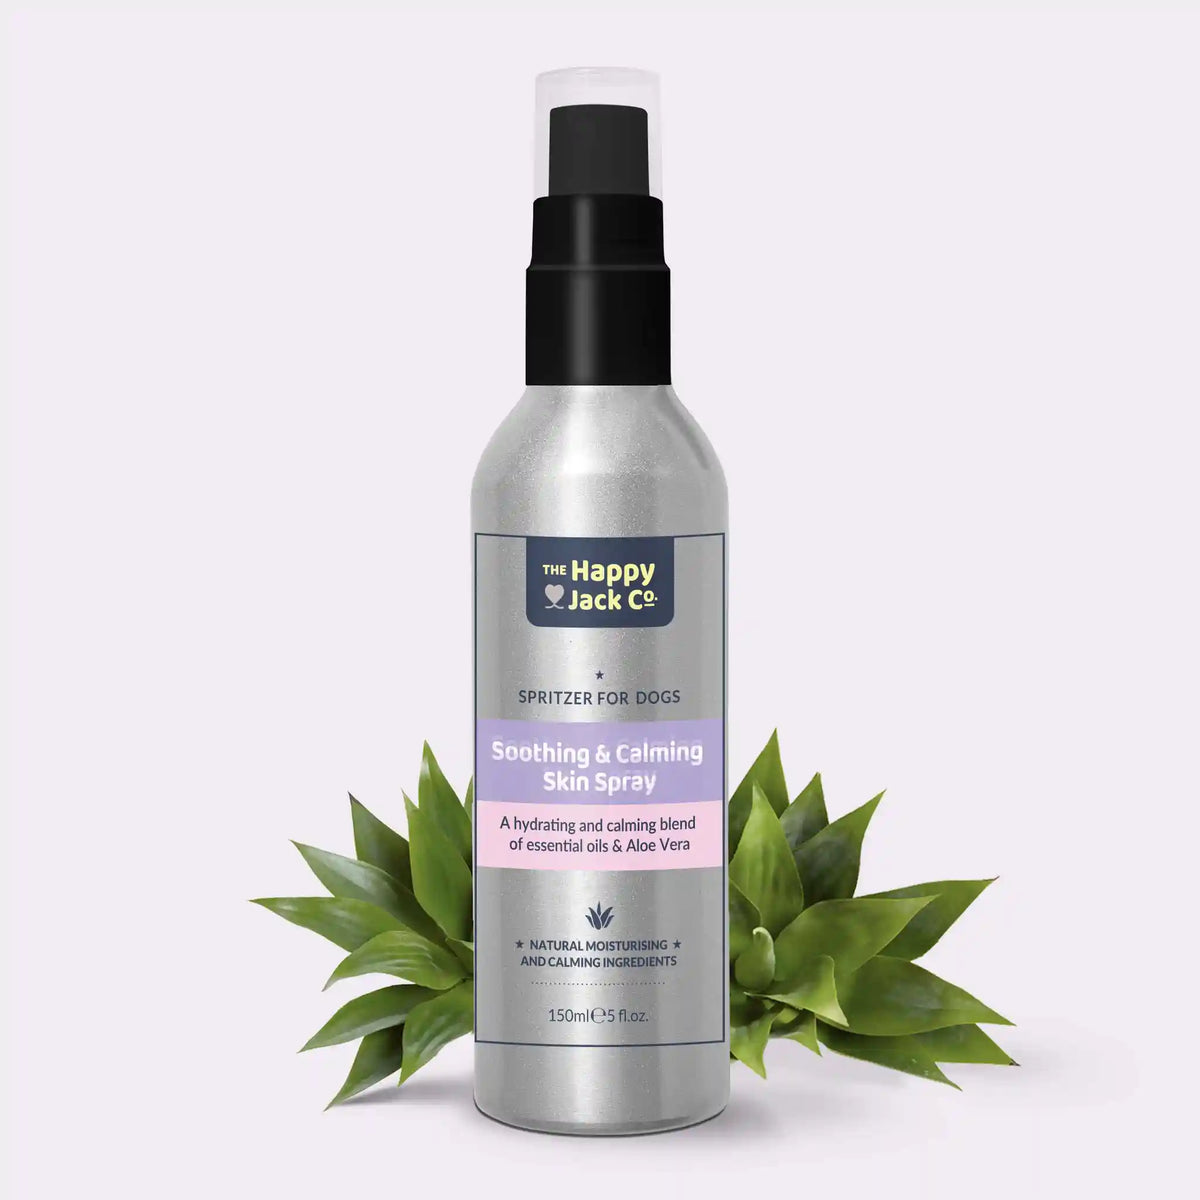 Soothing skin spray for dogs - The Happy Jack Co